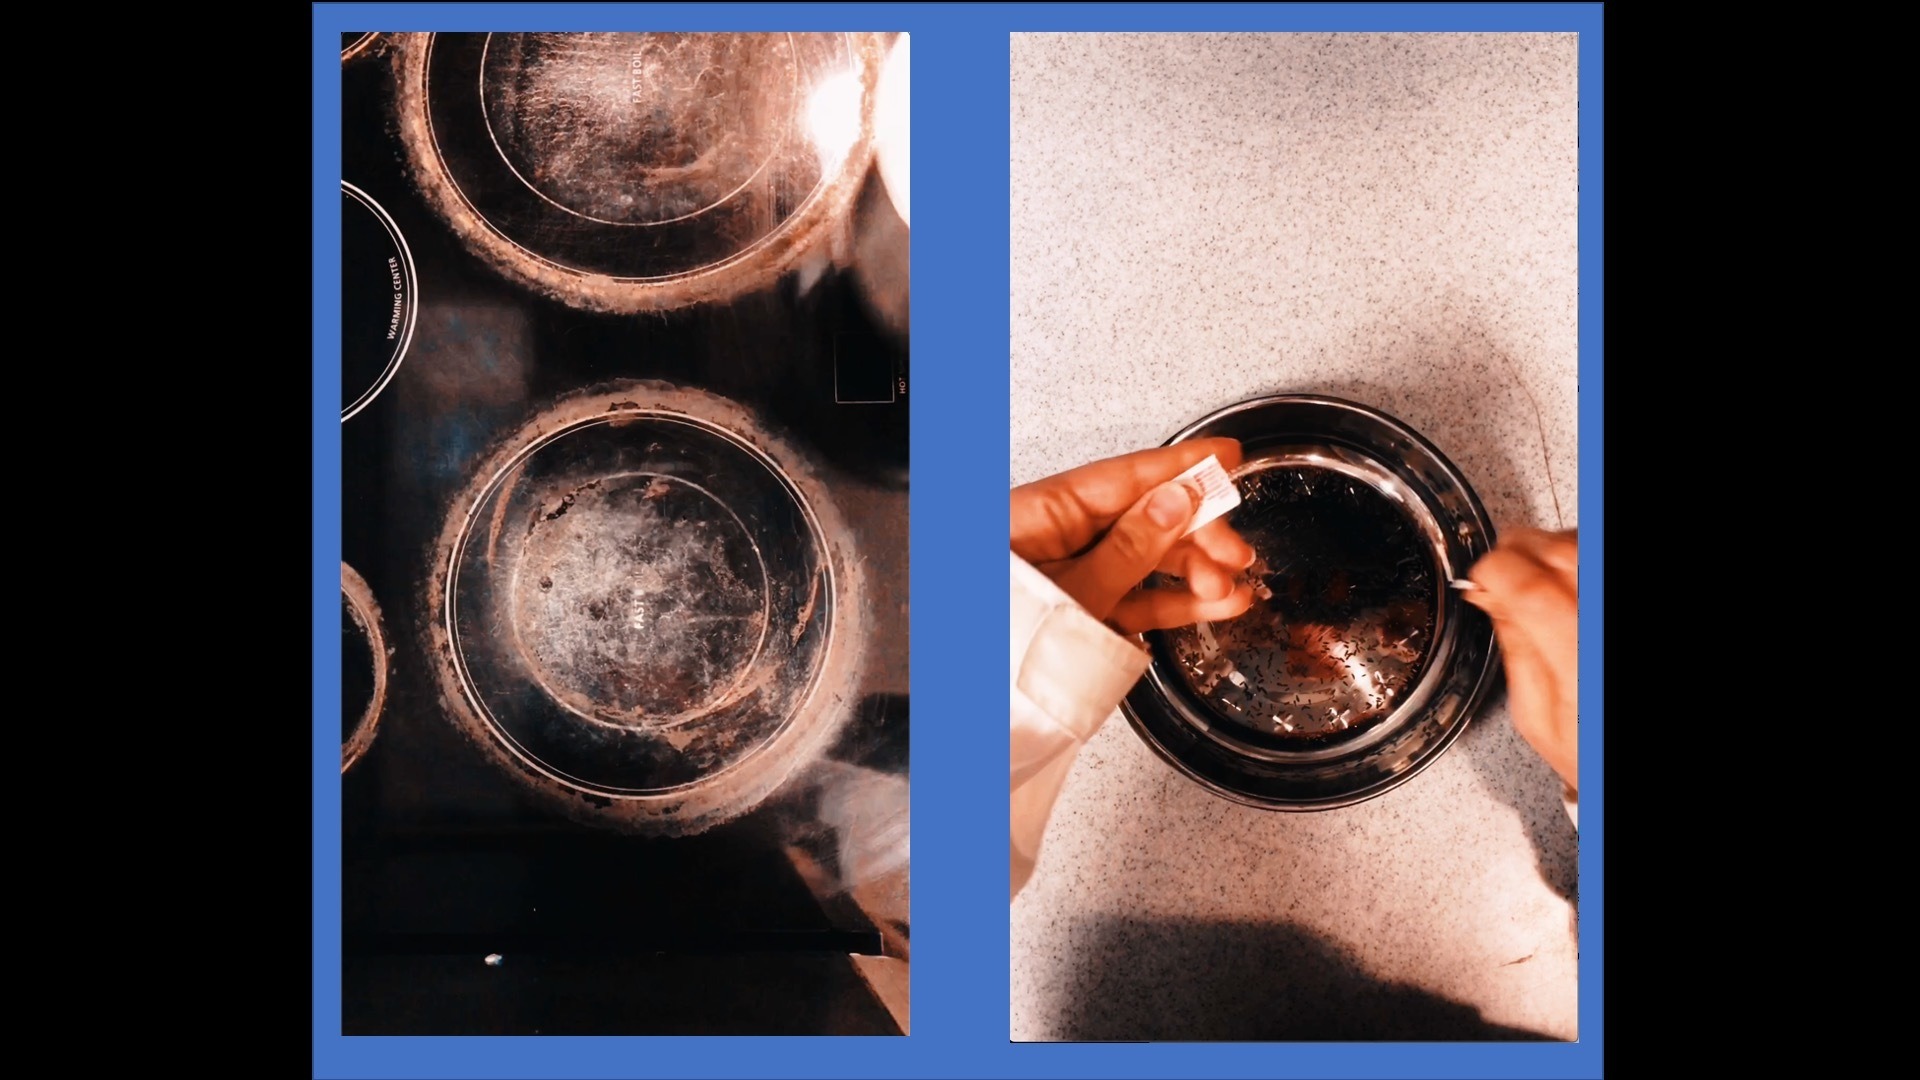 photos of abstract close-up of an electric stove top and hands opening packet over metal bowl